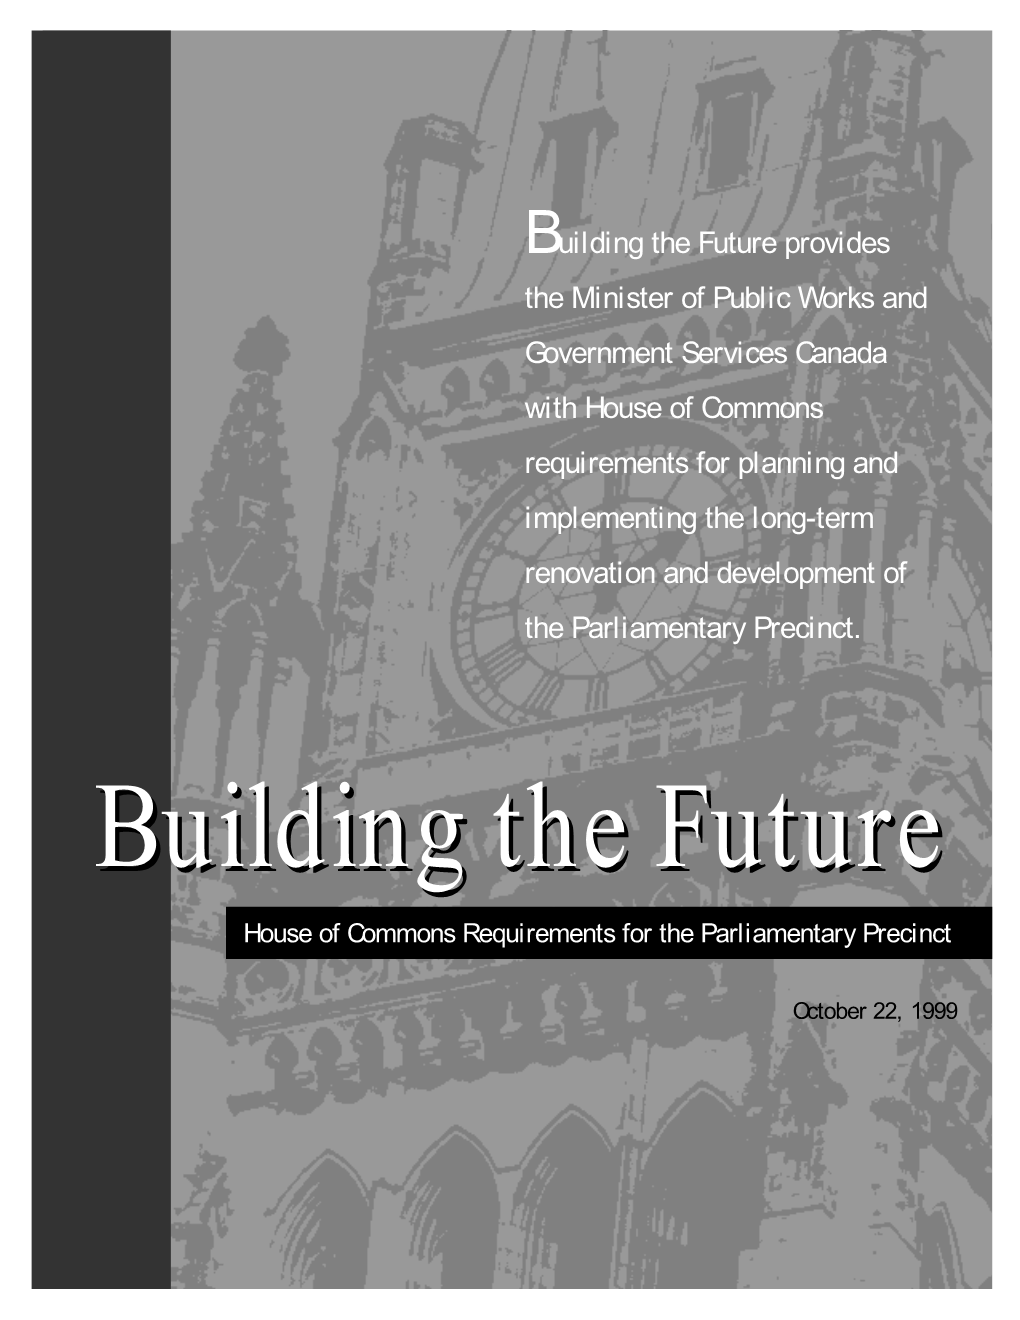 Building the Future Provides the Minister of Public Works and Government Services Canada with House of Commons Requirements